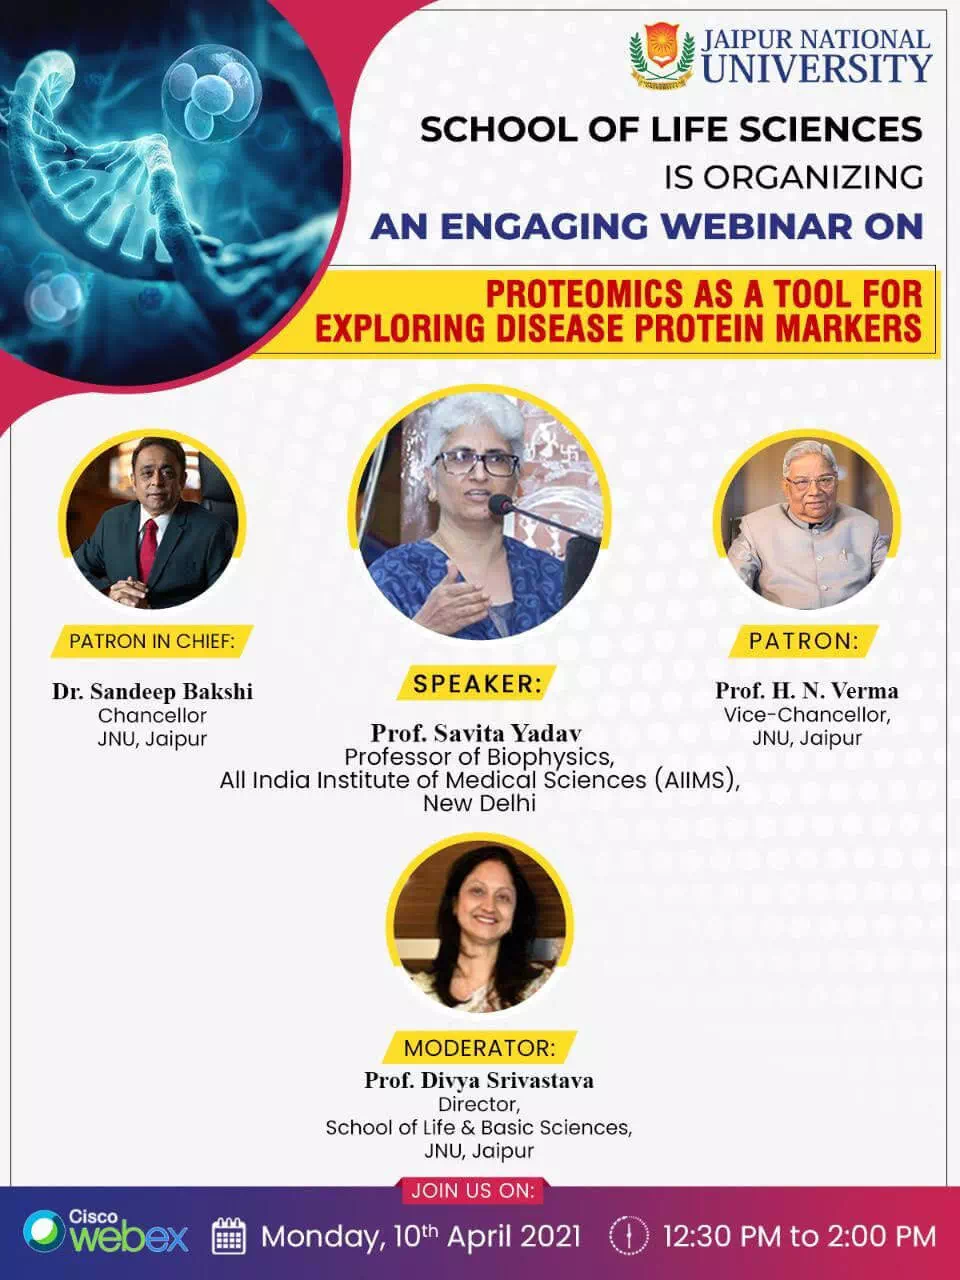 Webinar on “Proteomics as A tool for exploring disease protein markers”